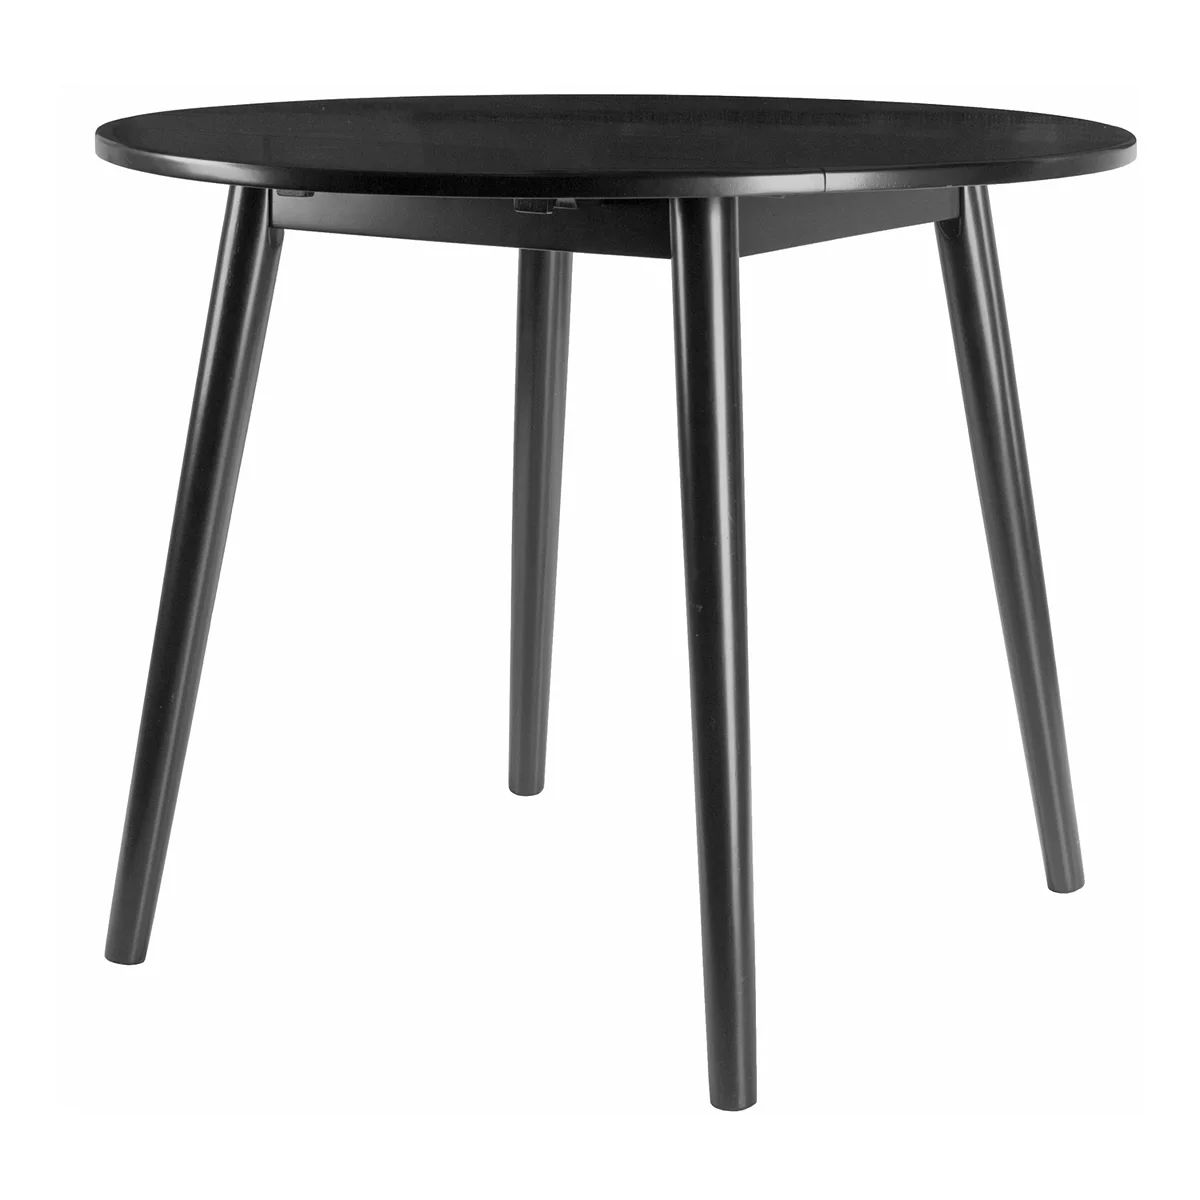 Winsome Moreno Round Drop Leaf Table | Kohl's